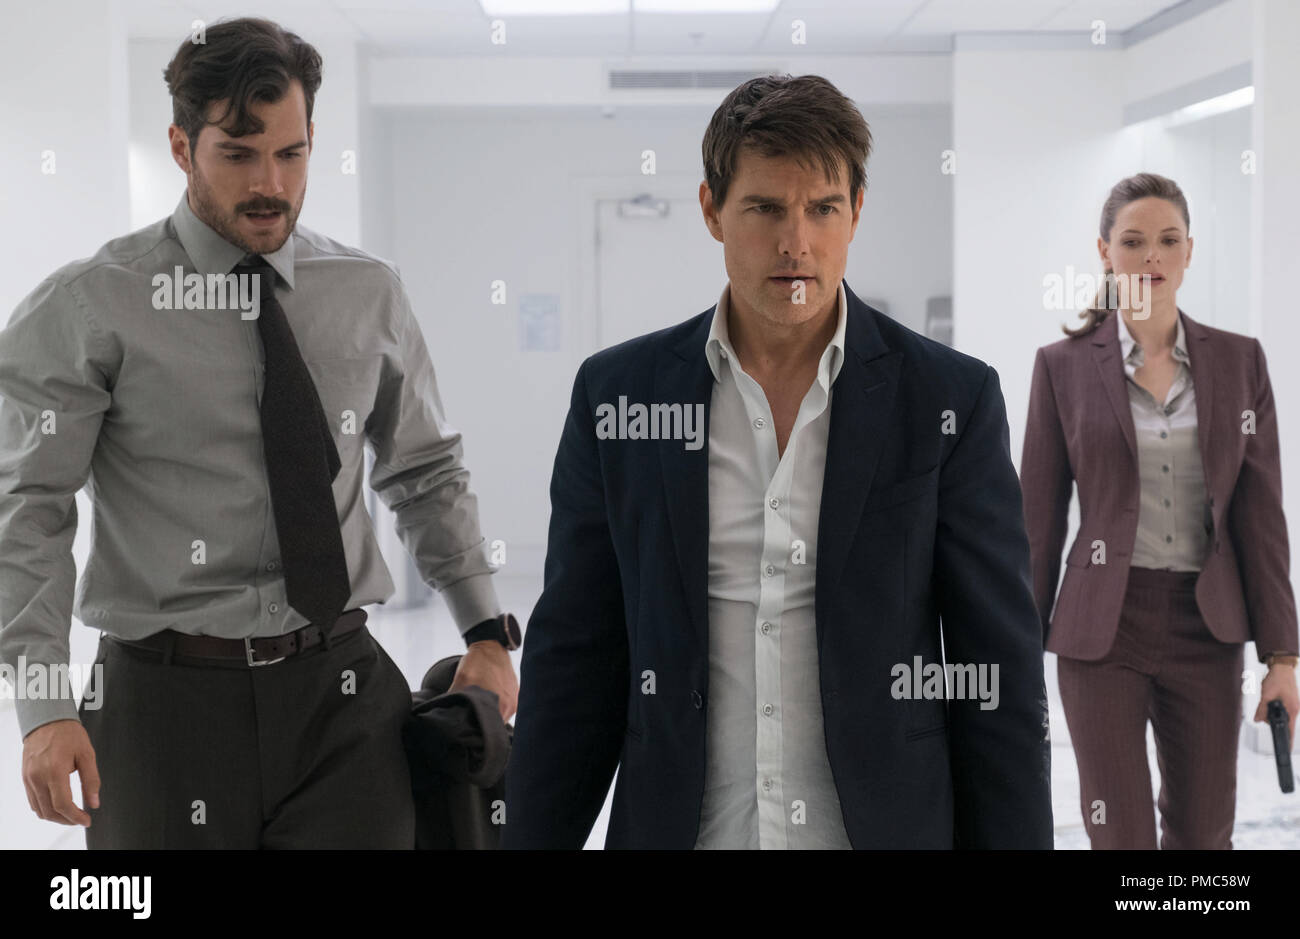 Left to right: Henry Cavill as August Walker, Tom Cruise as Ethan Hunt and Rebecca Ferguson as Ilsa Faust in MISSION: IMPOSSIBLE - FALLOUT, from Paramount Pictures and Skydance. (2018) Stock Photo